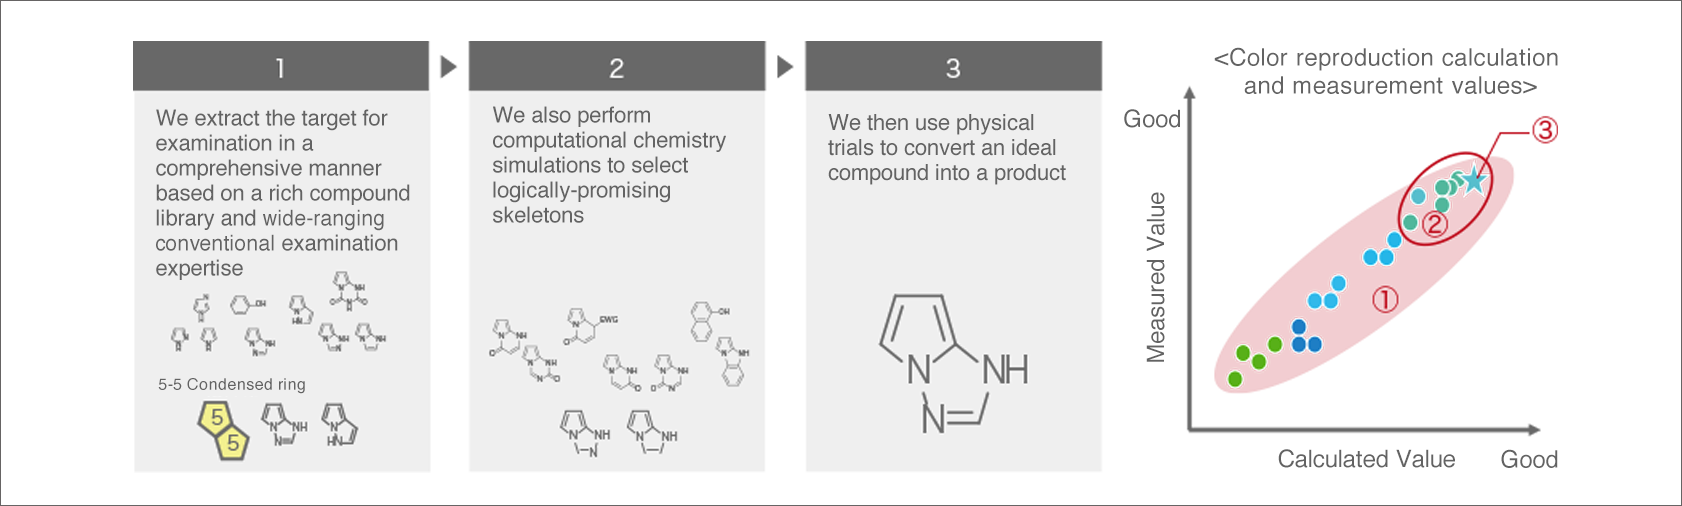 [image] Example of Molecular Design for Dyes with Strong Color Replicability